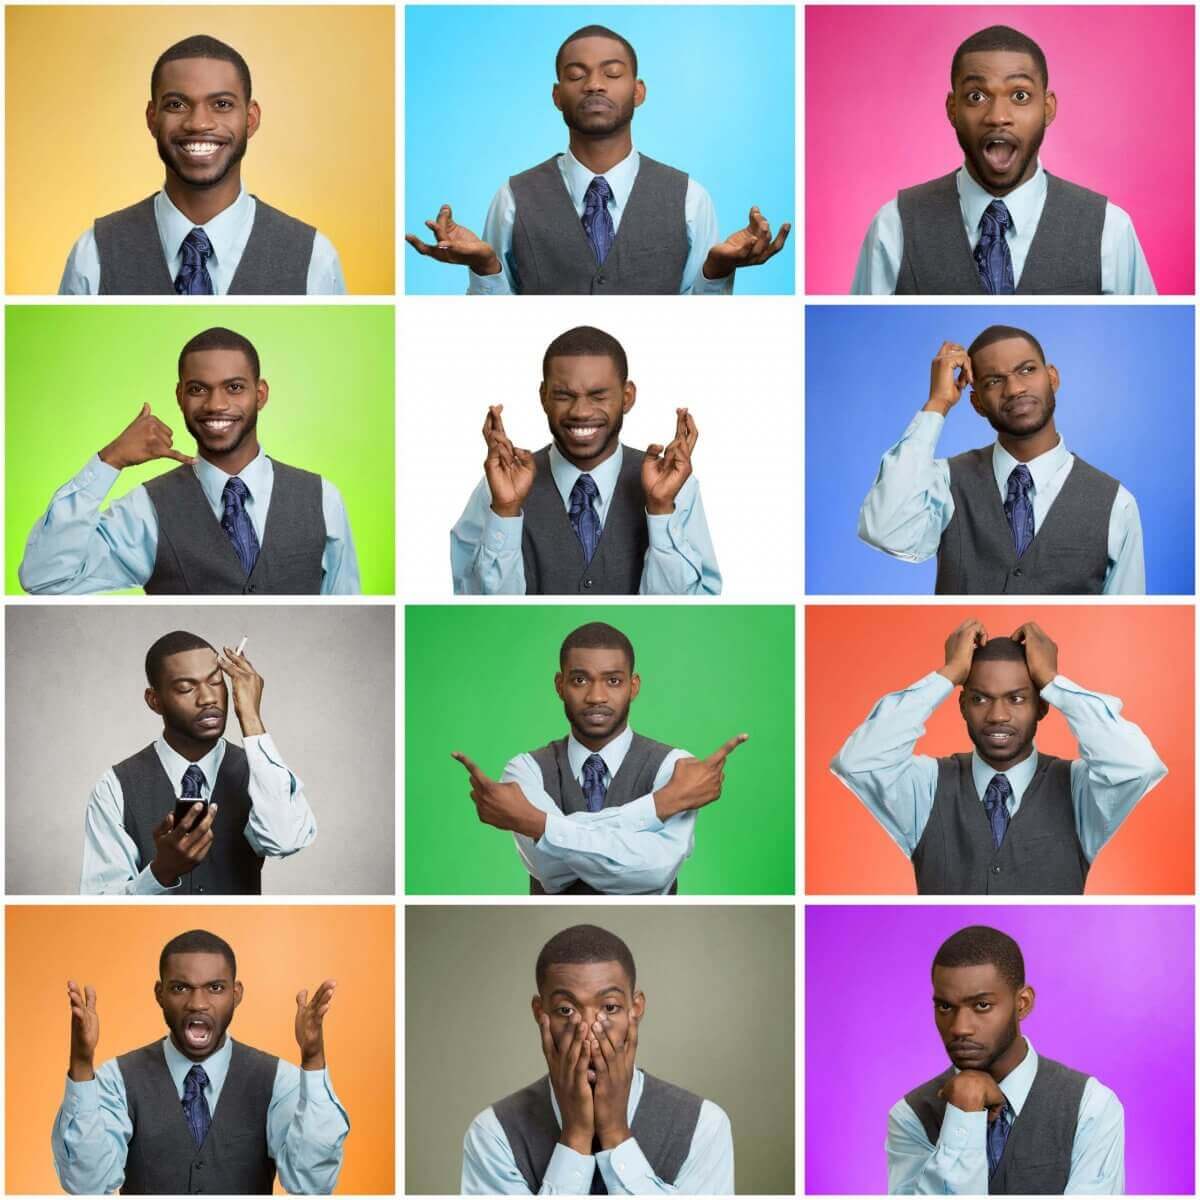 A black man providing a lesson for how to read facial expressions and body language